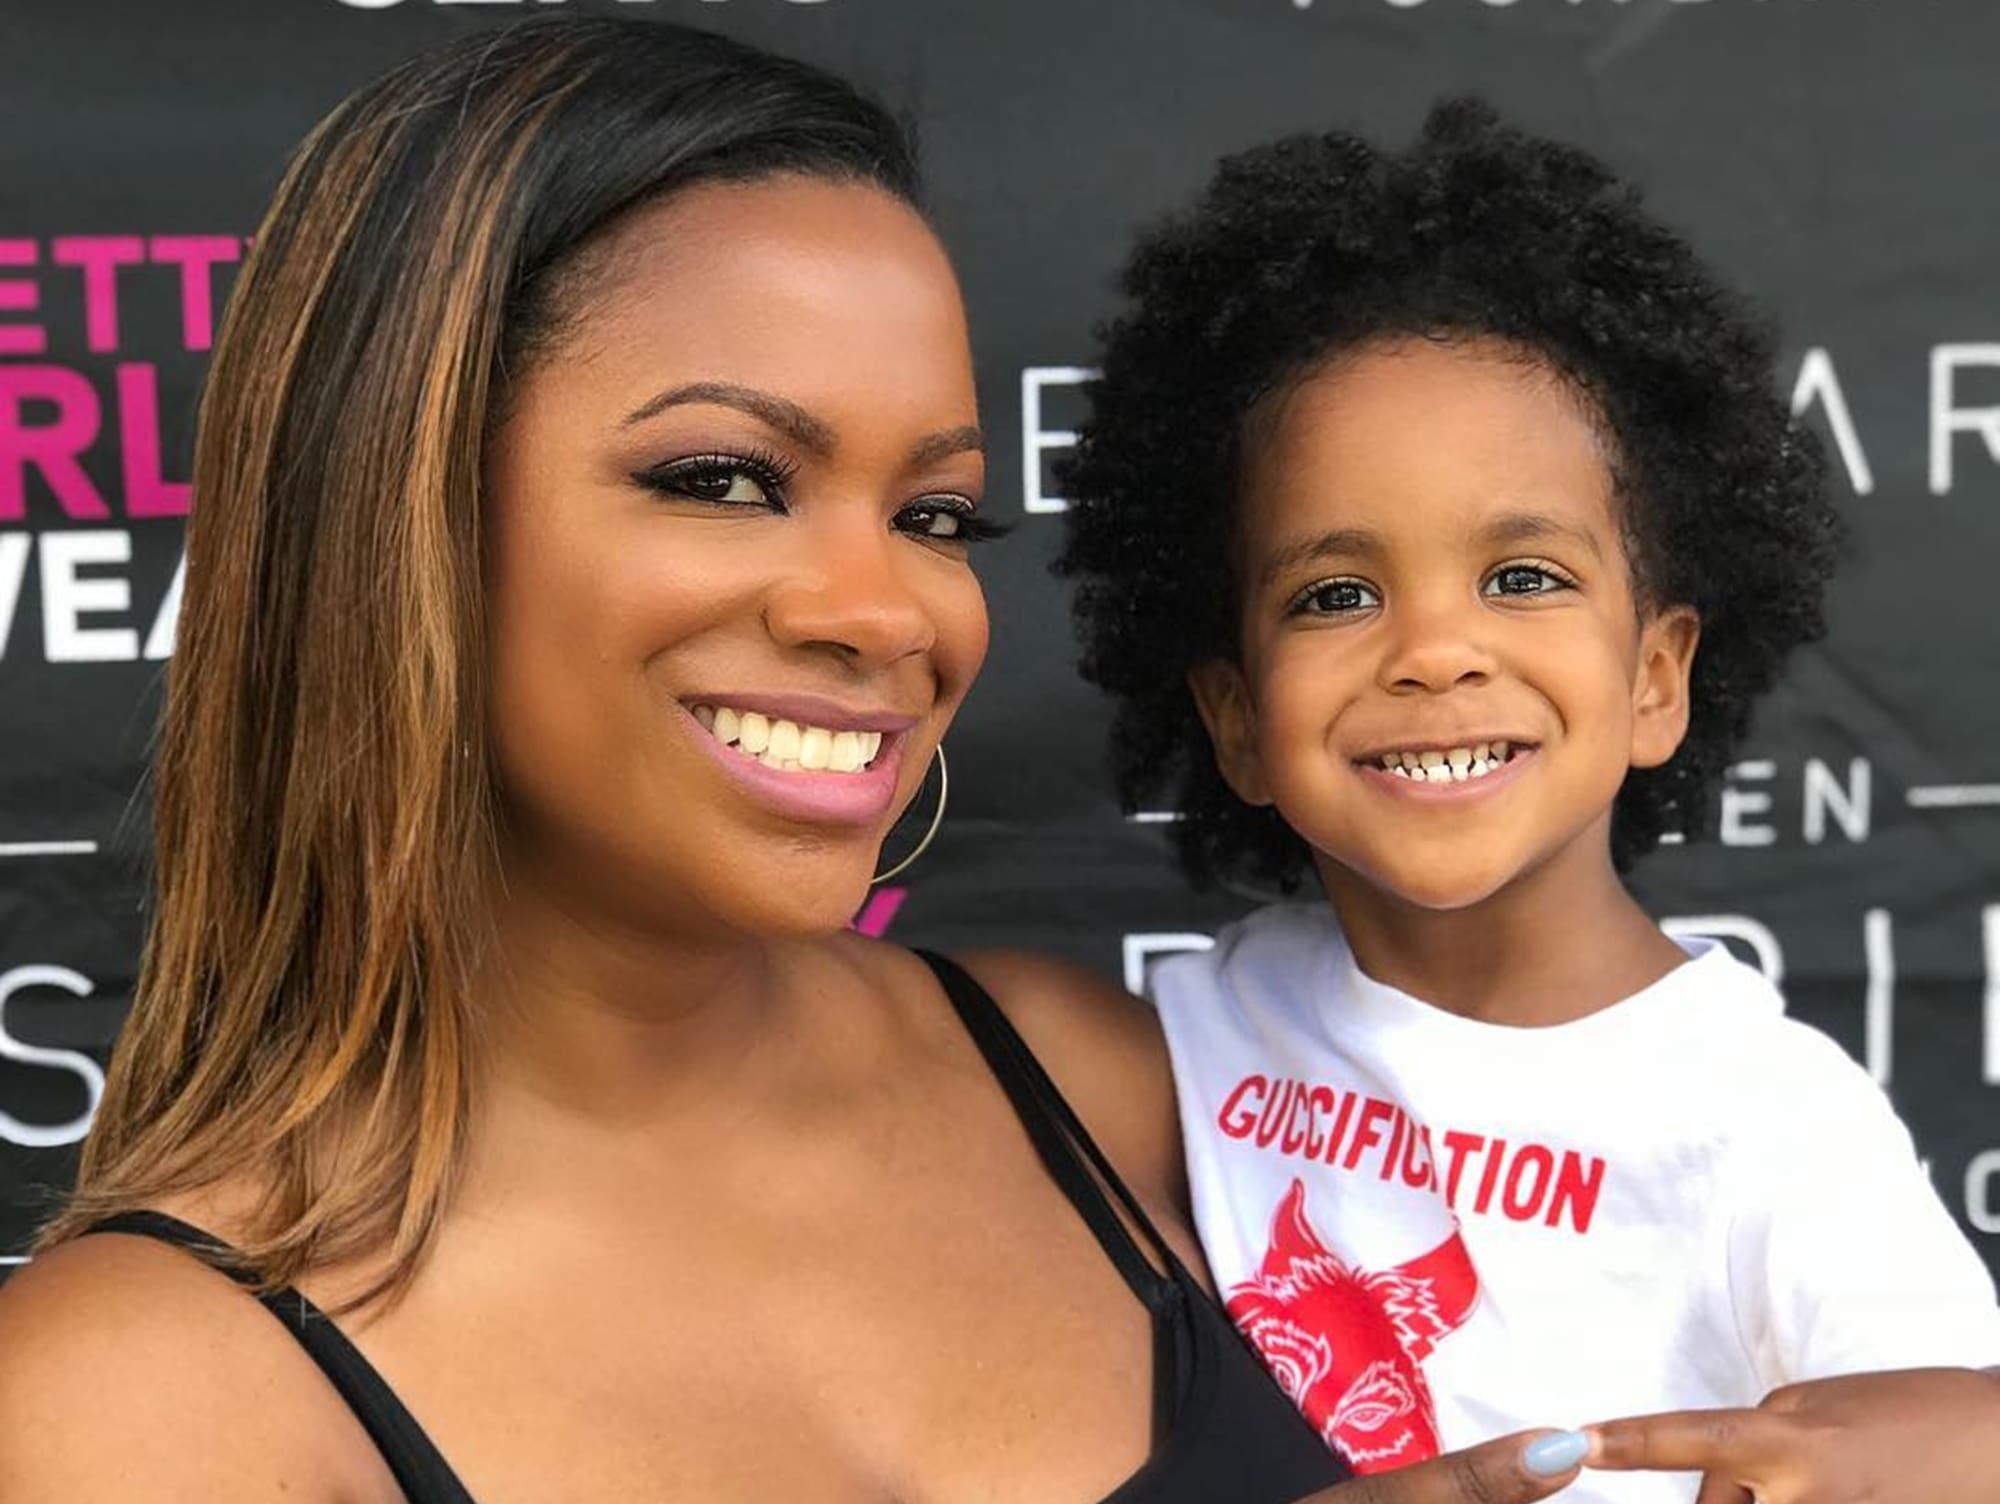 Kandi Burruss' Latest Photo With Ace Wells Tucker From Their Jamaica Trip Has Fans' Hearts Melting